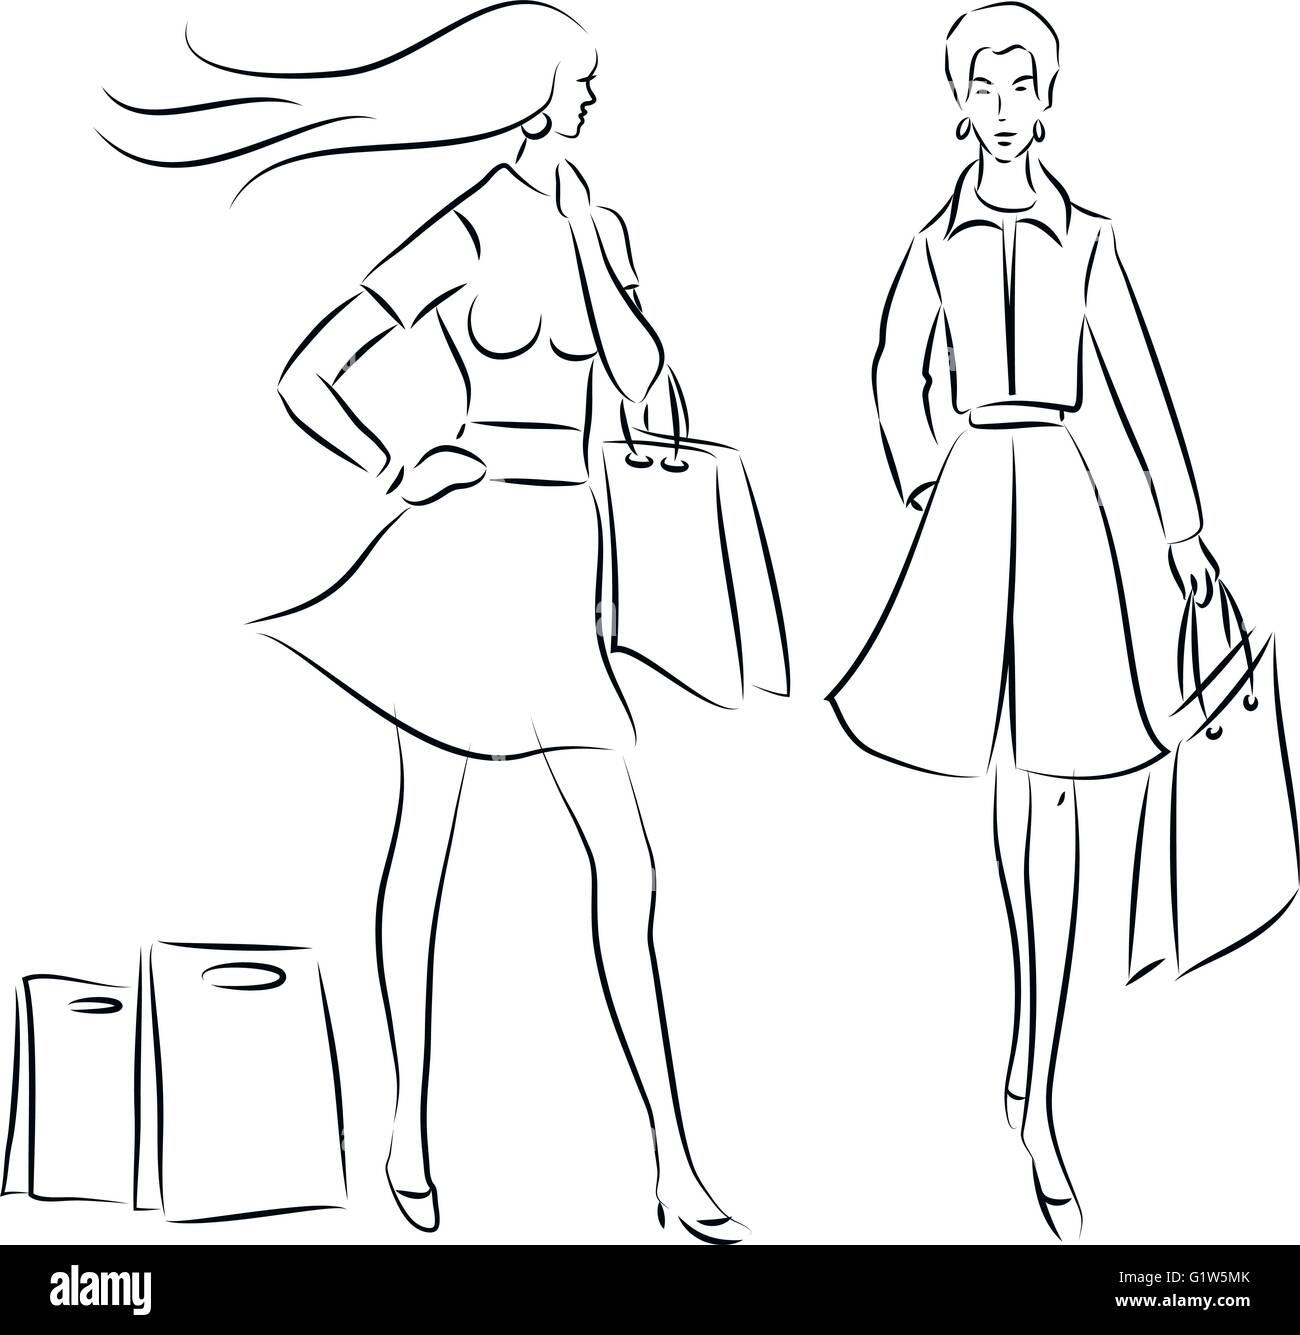 Shopping Fashion Drawing Personal Shopper Sketch PNG, Clipart, Business  Woman, Clothing, Coffee Shop, Costume, Fashion Accessory